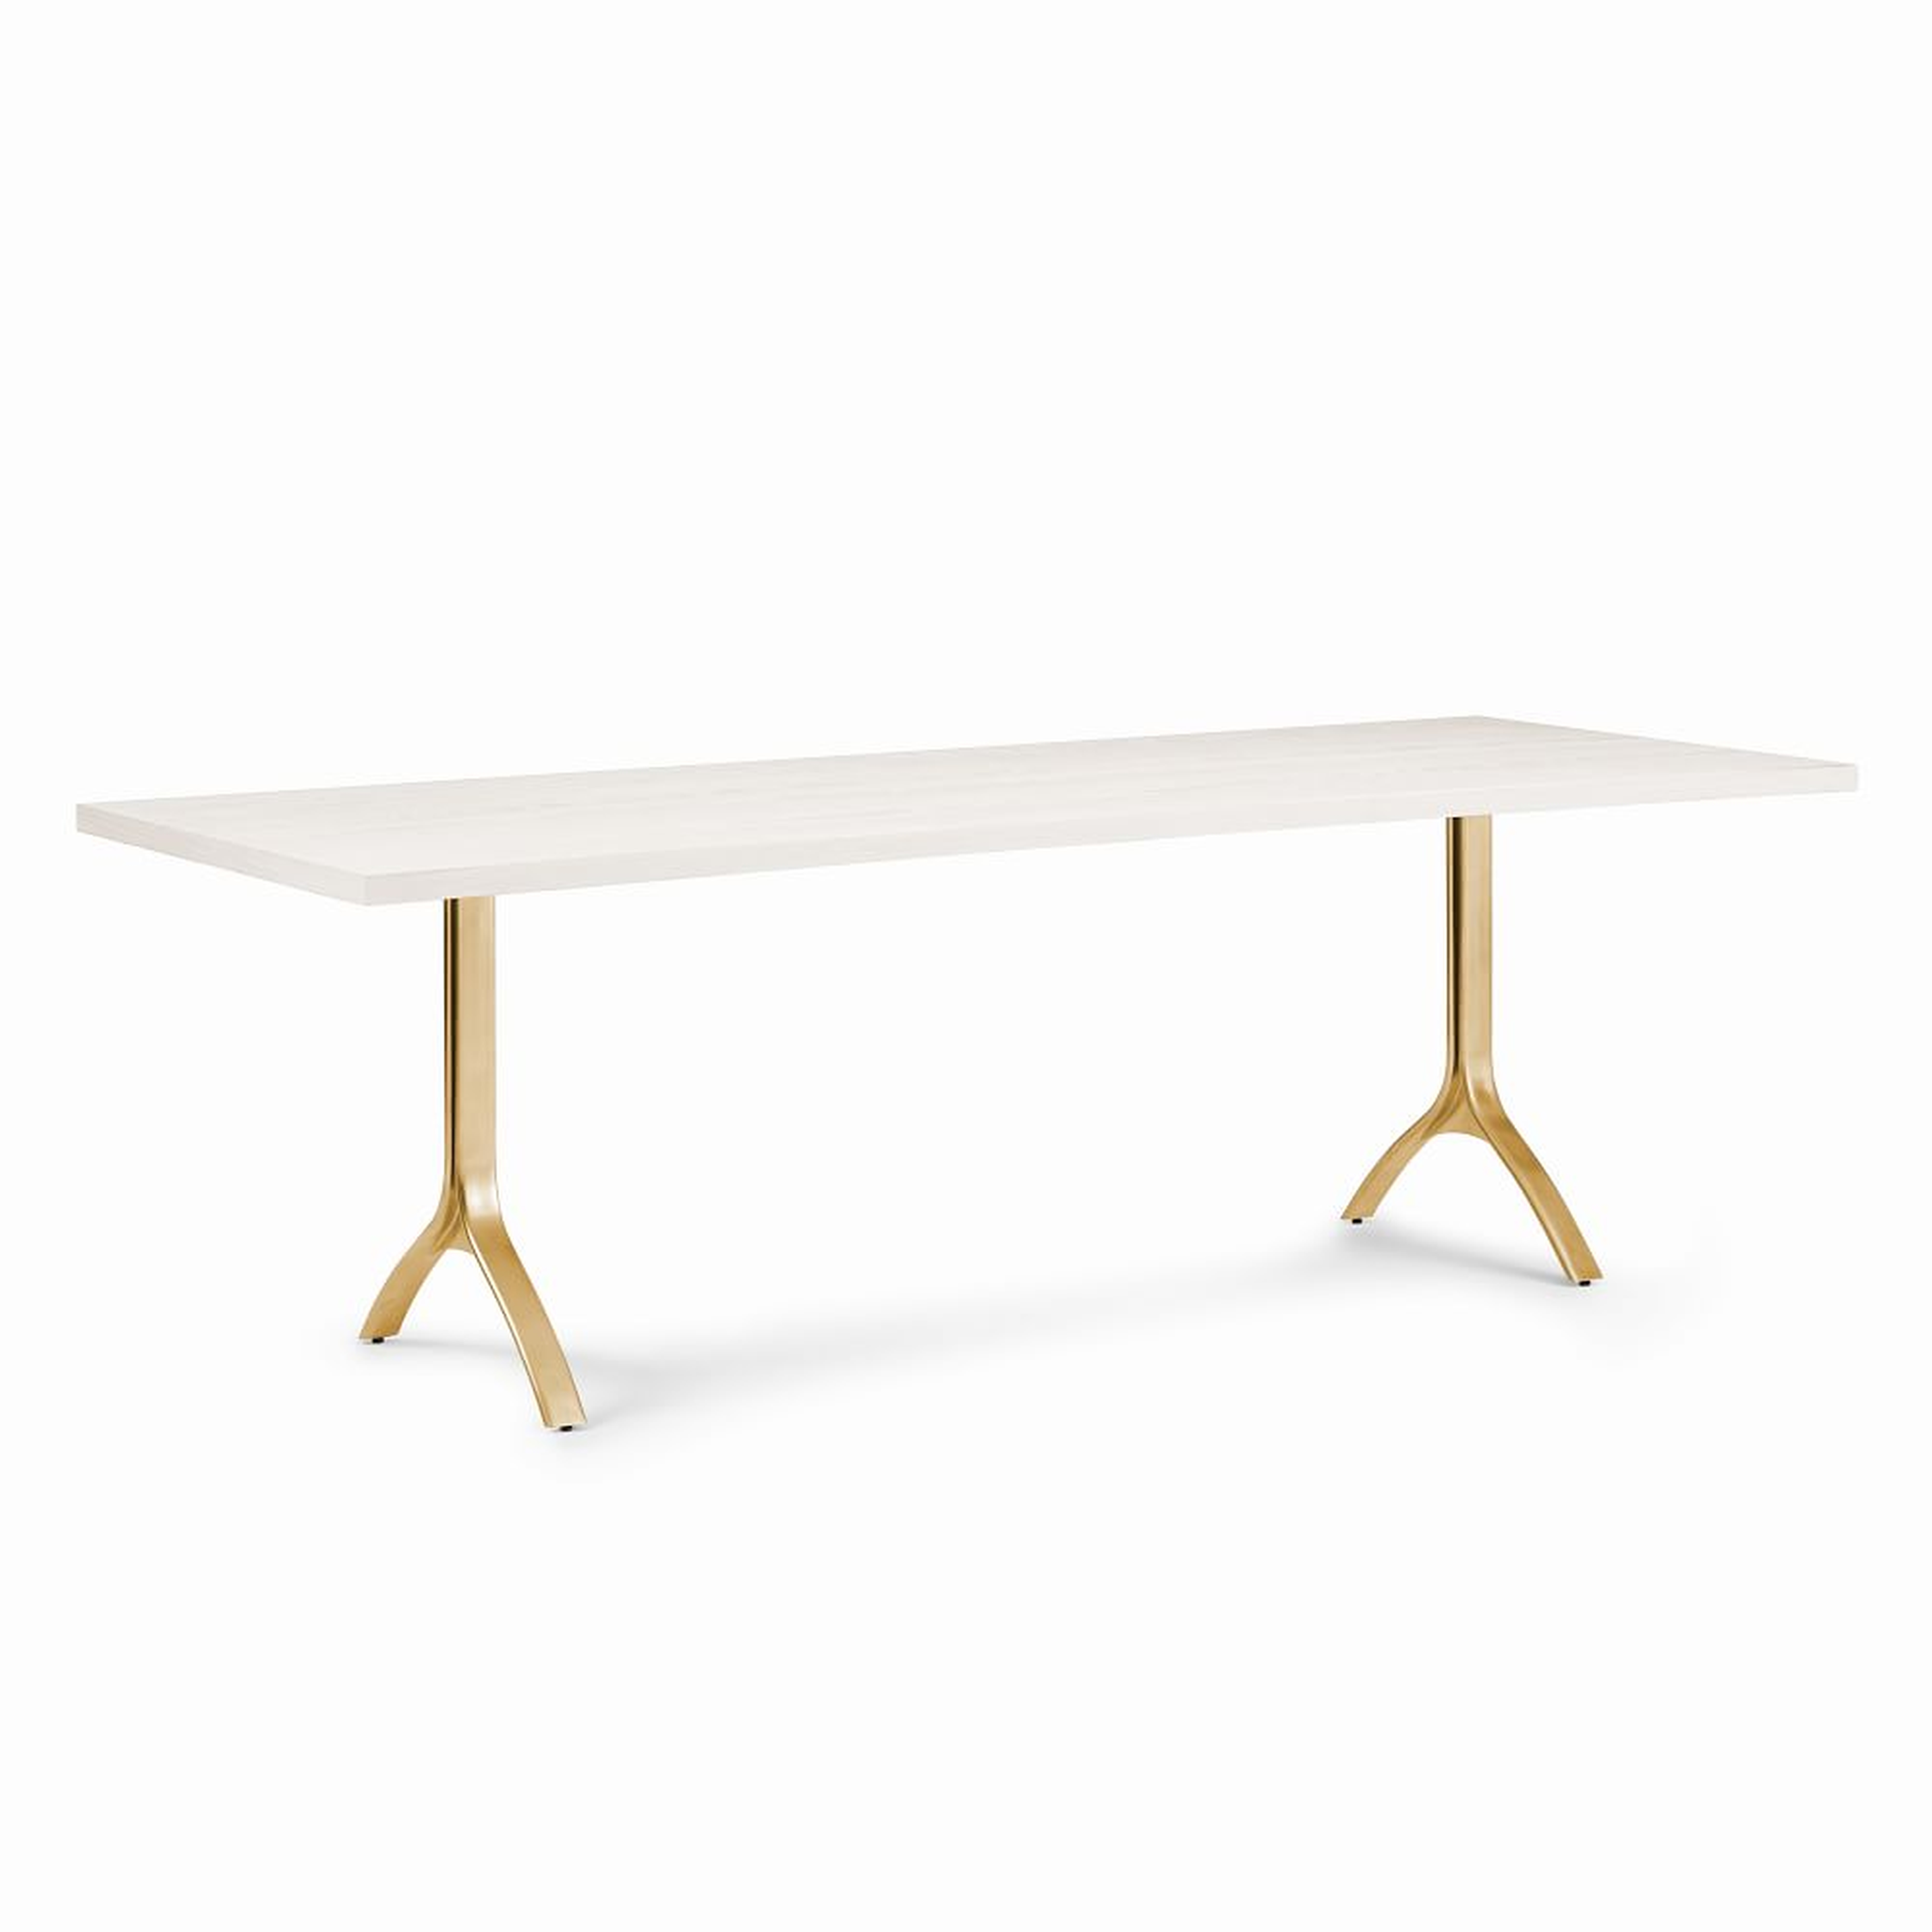 Avery Wishbone 74" Dining Table, Winter Wood, Antique Brass - West Elm